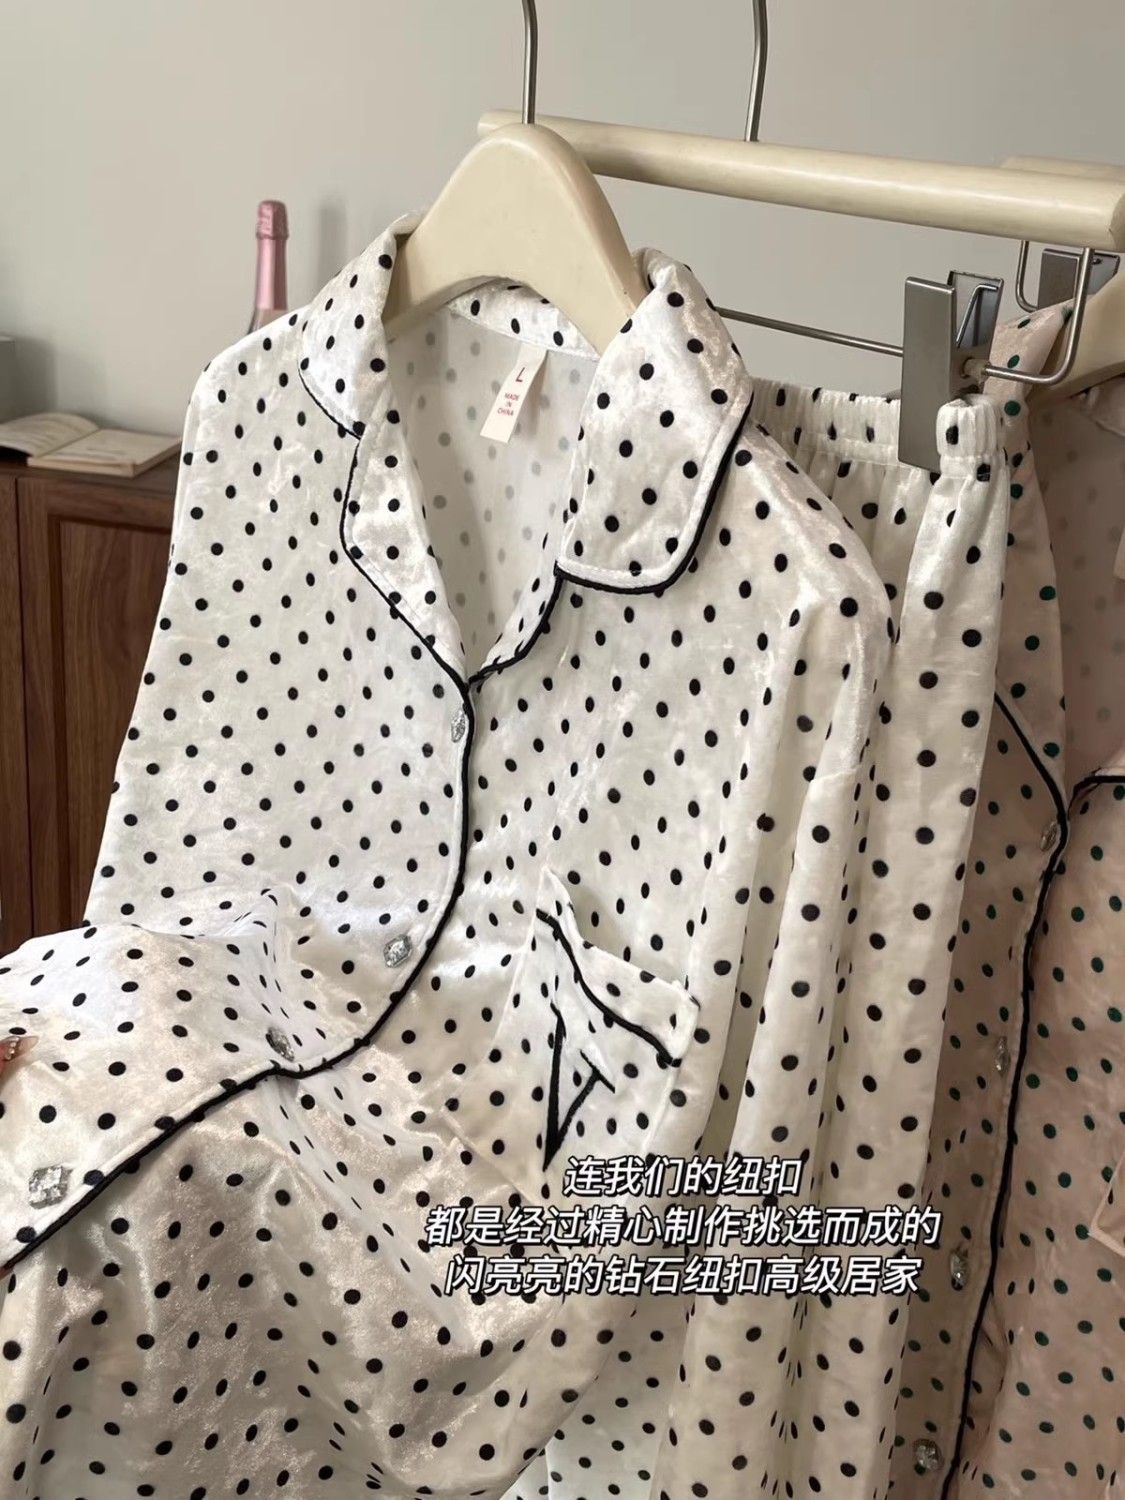 Polka-dot gold velvet pajamas for women 2023 new autumn and winter Internet celebrity style can be worn outside home clothes suit spring two-piece set